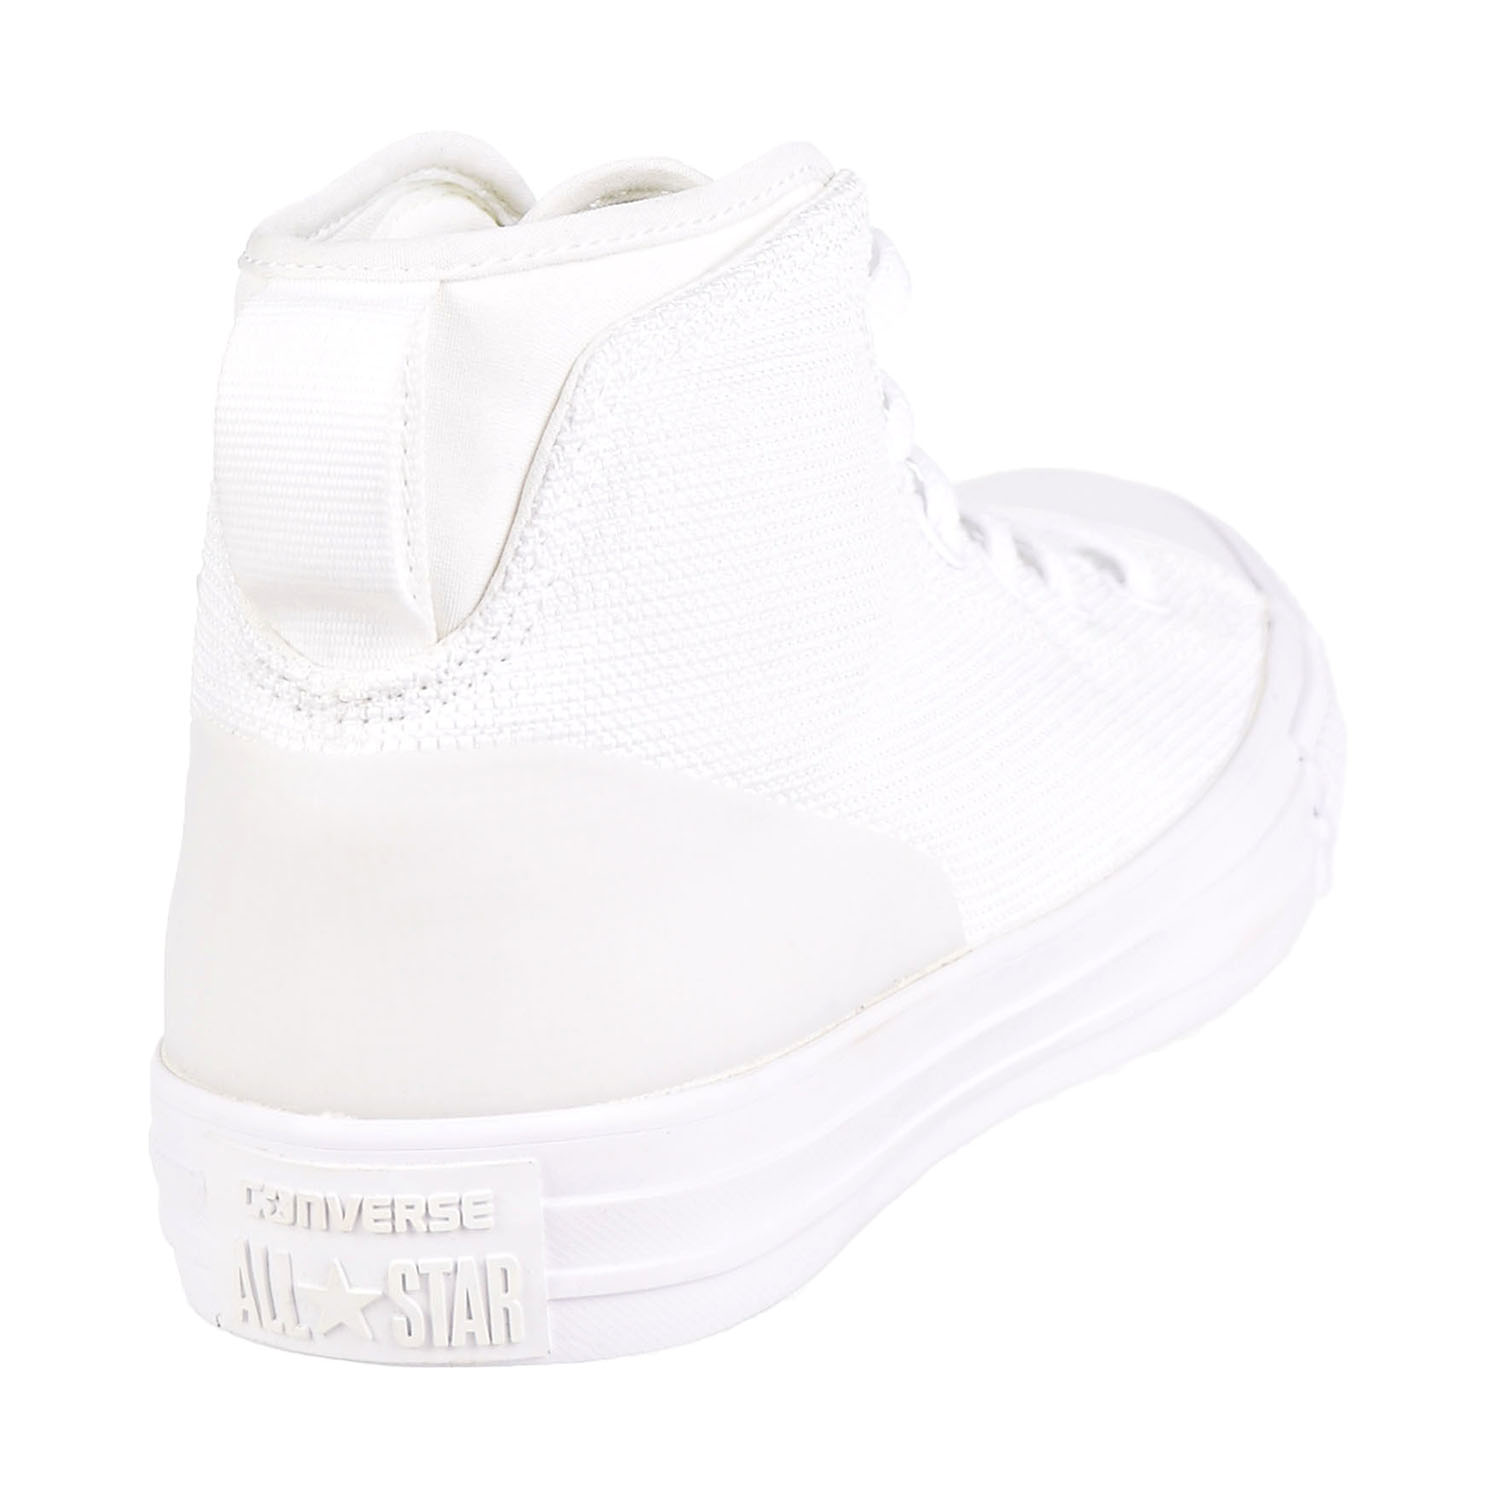 Converse Chuck Taylor All Star Syde Street Men's Shoes White-White 155490c - image 3 of 6